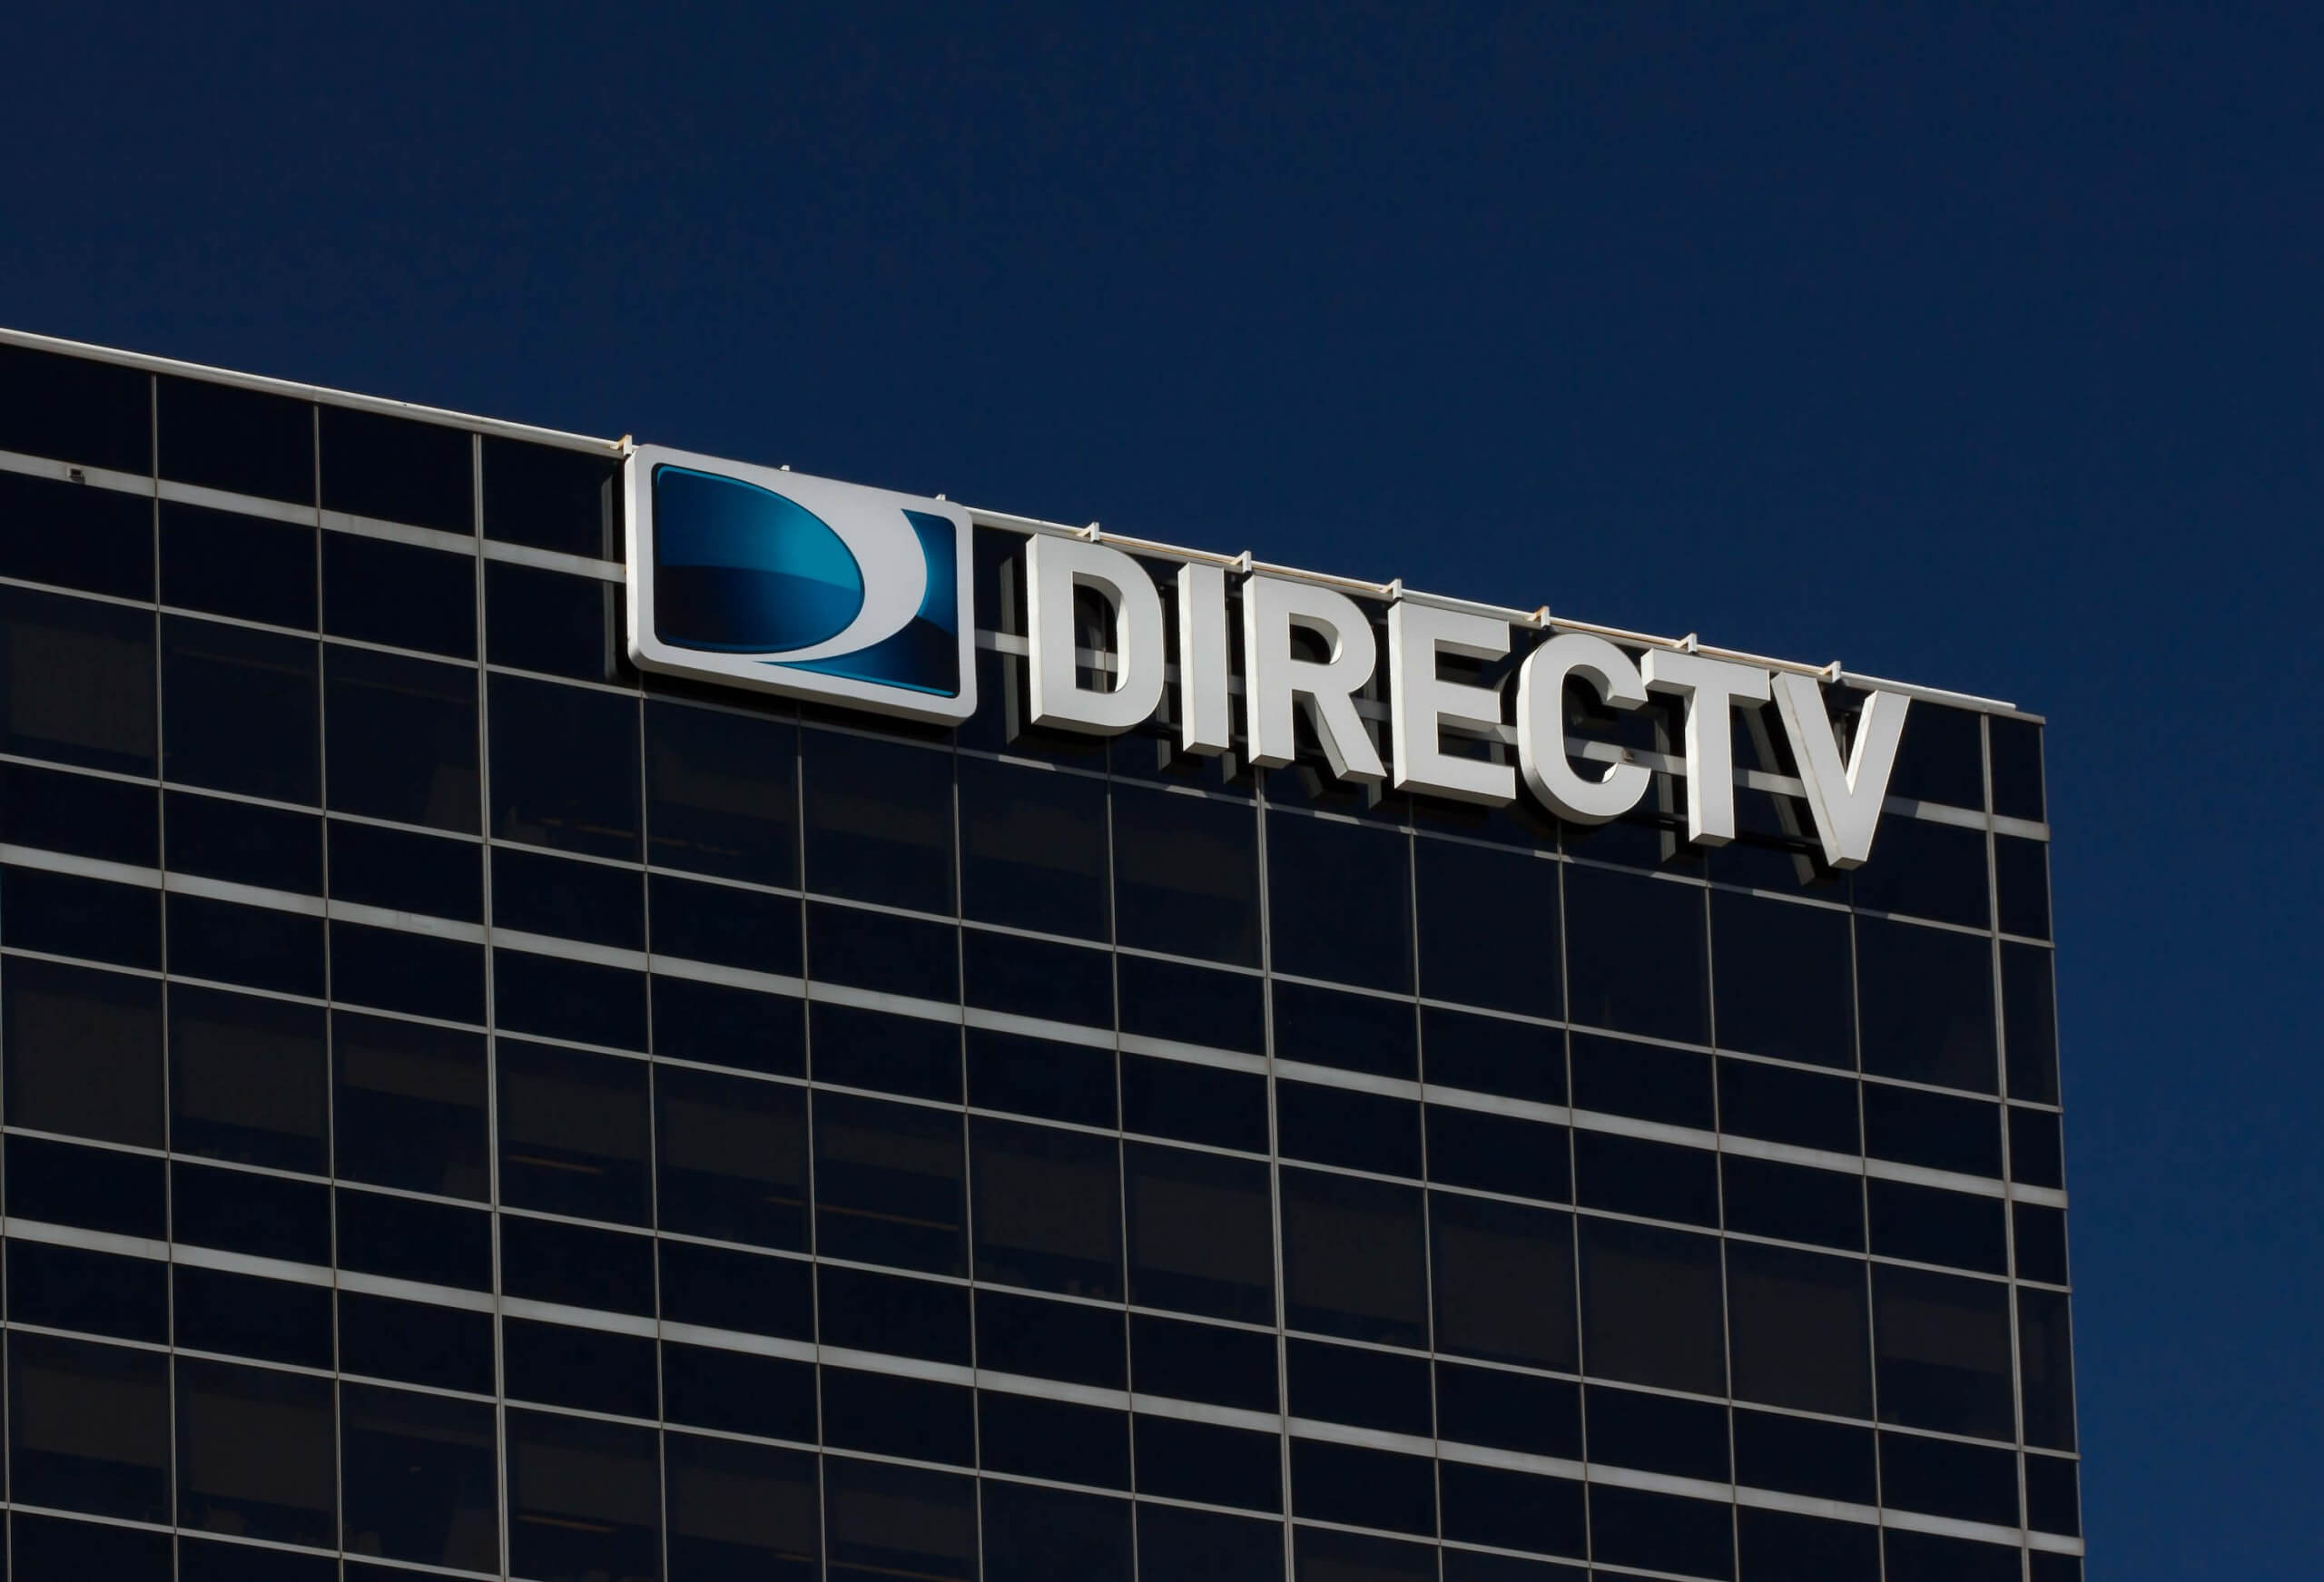 With subscribers dwindling, AT&T considers ways to ditch DirecTV